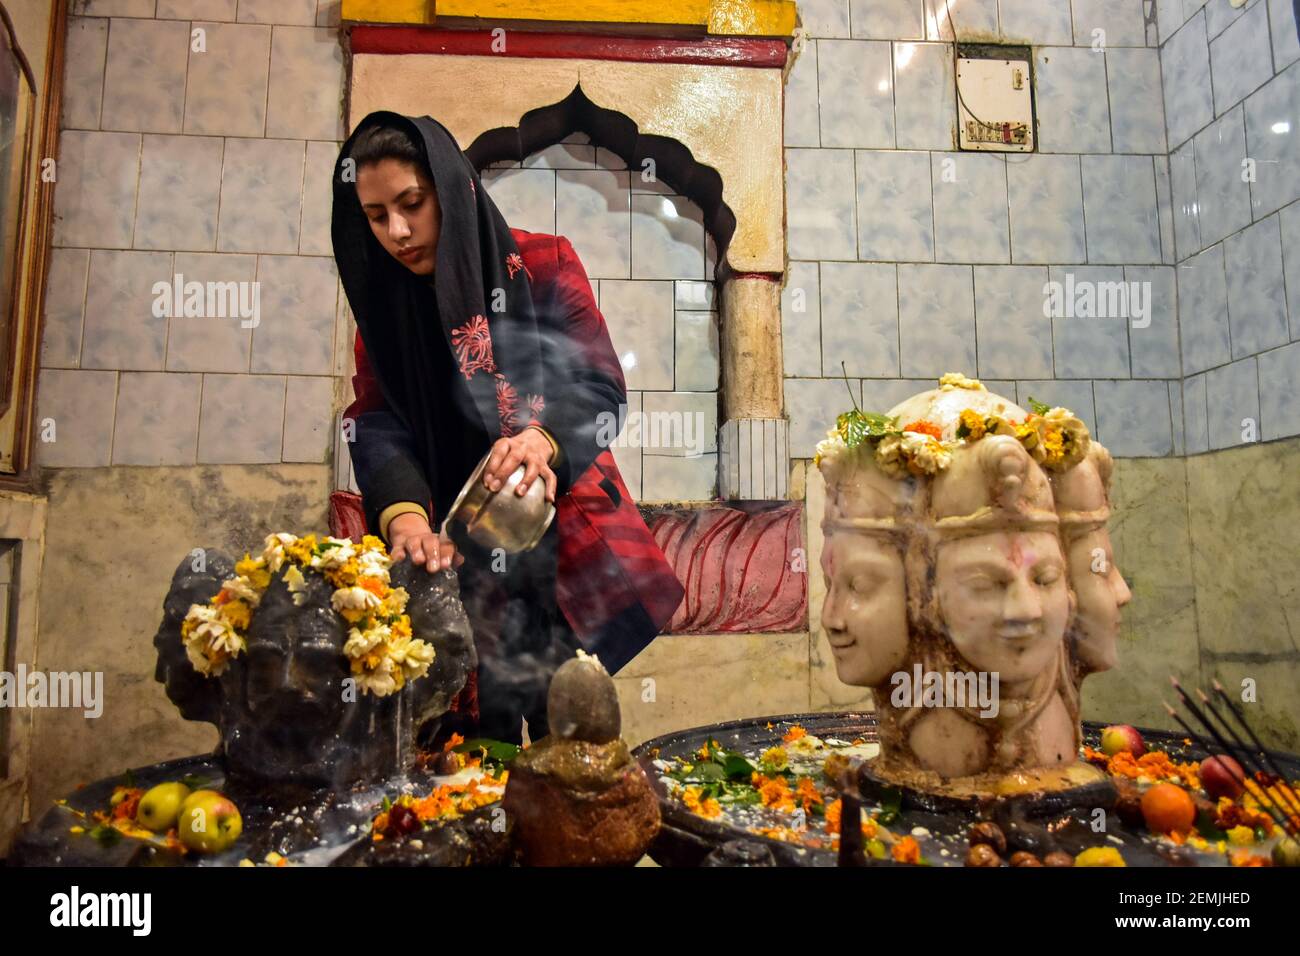 A Hindu devotee seen pouring milk over a Shiva Lingam, a stone ...